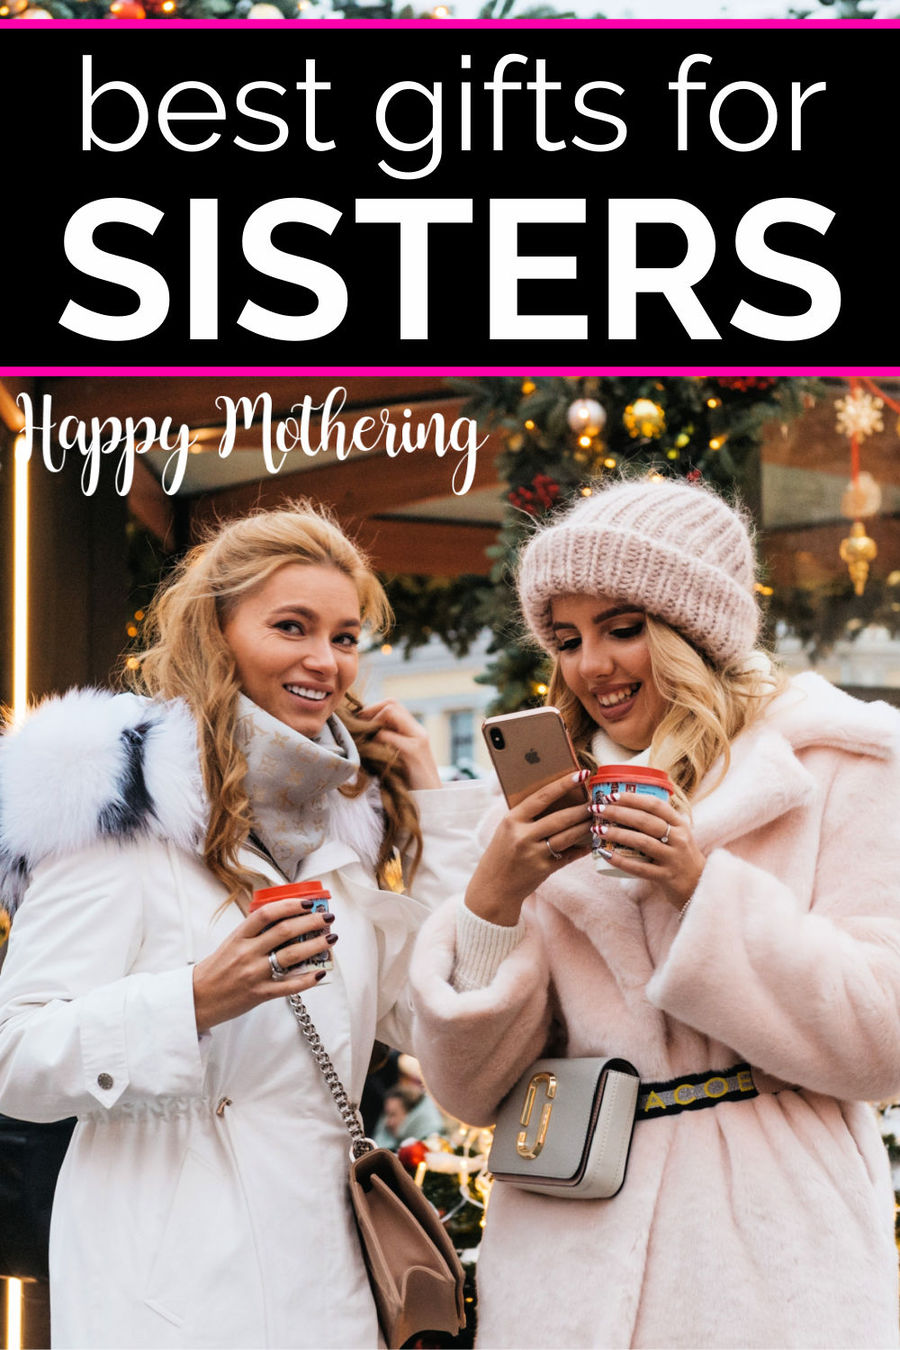 Two sisters at a mall during Christmas time all bundled up and talking while looking at a phone